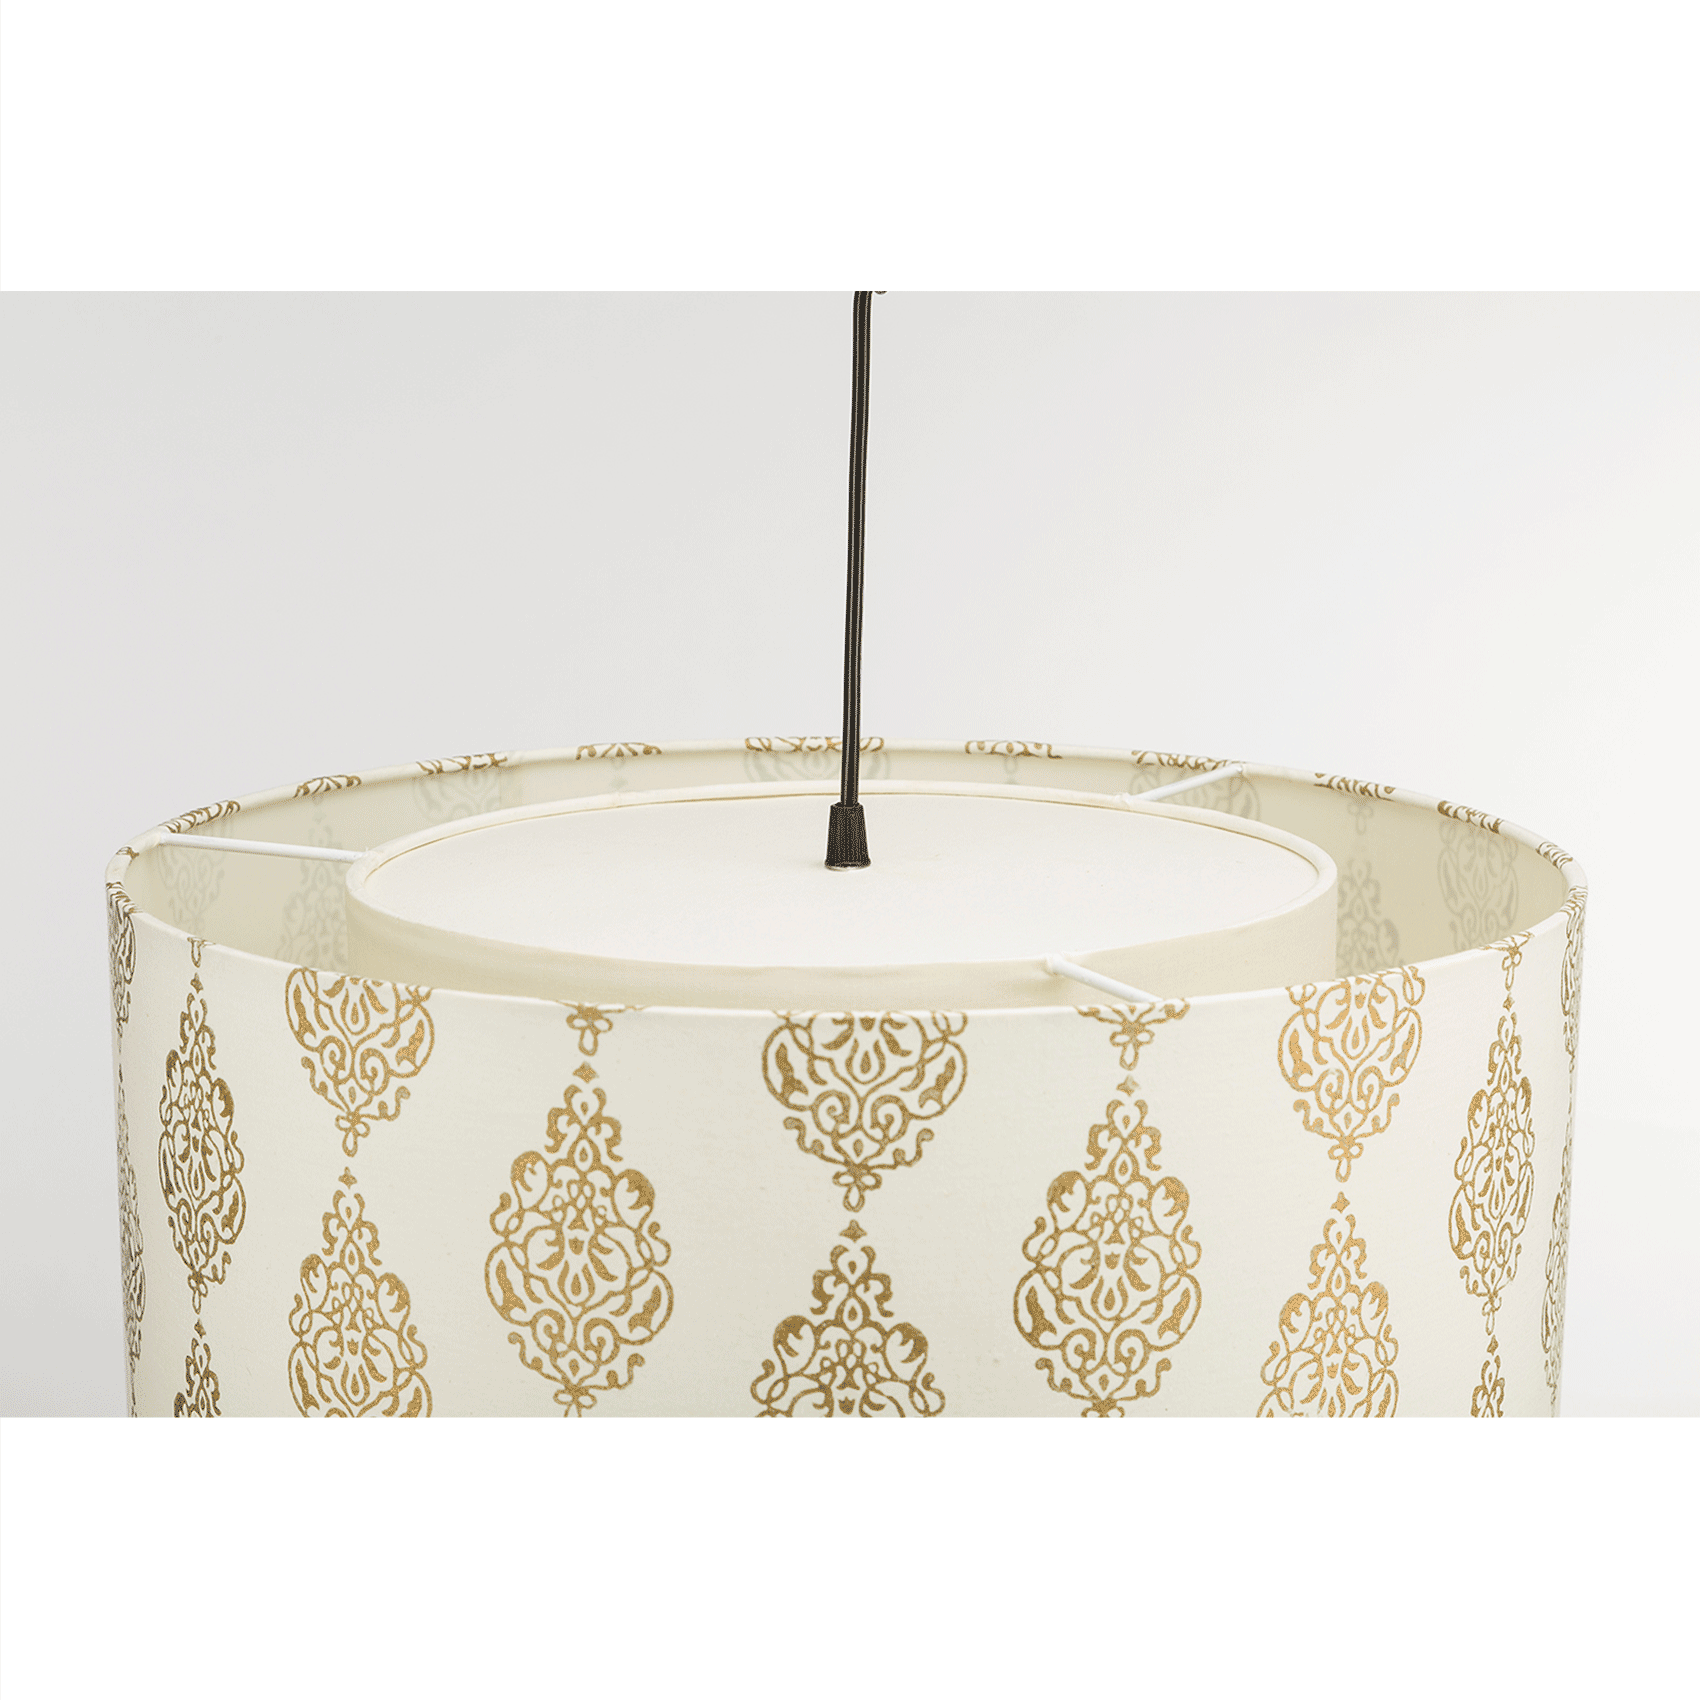 Handcrafted Block Printed Fabric and Poplin Fabric Suspended Lights